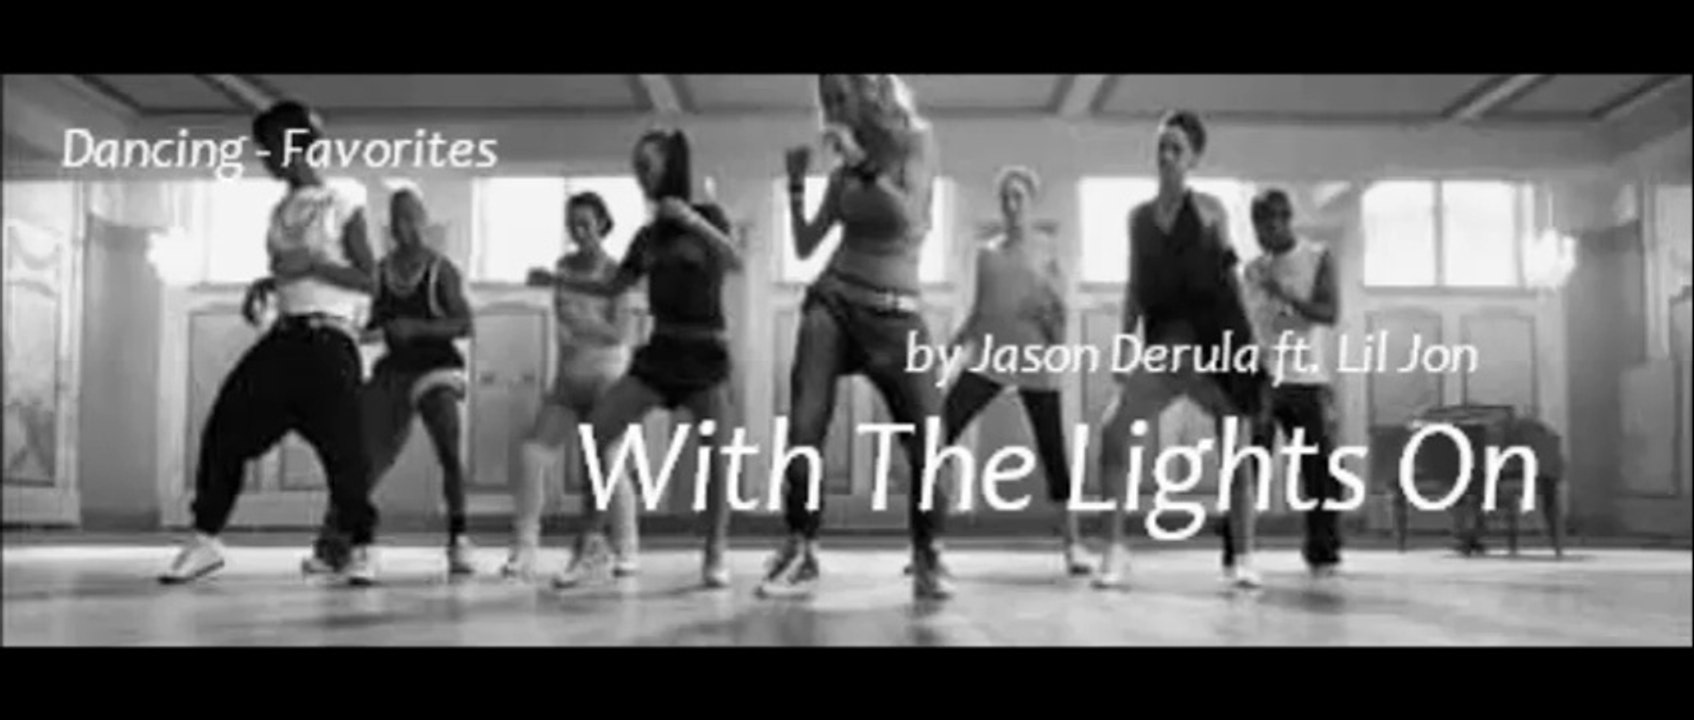 With The Lights On by Jason Derulo ft. Lil Jon (Dancing - Favorites)